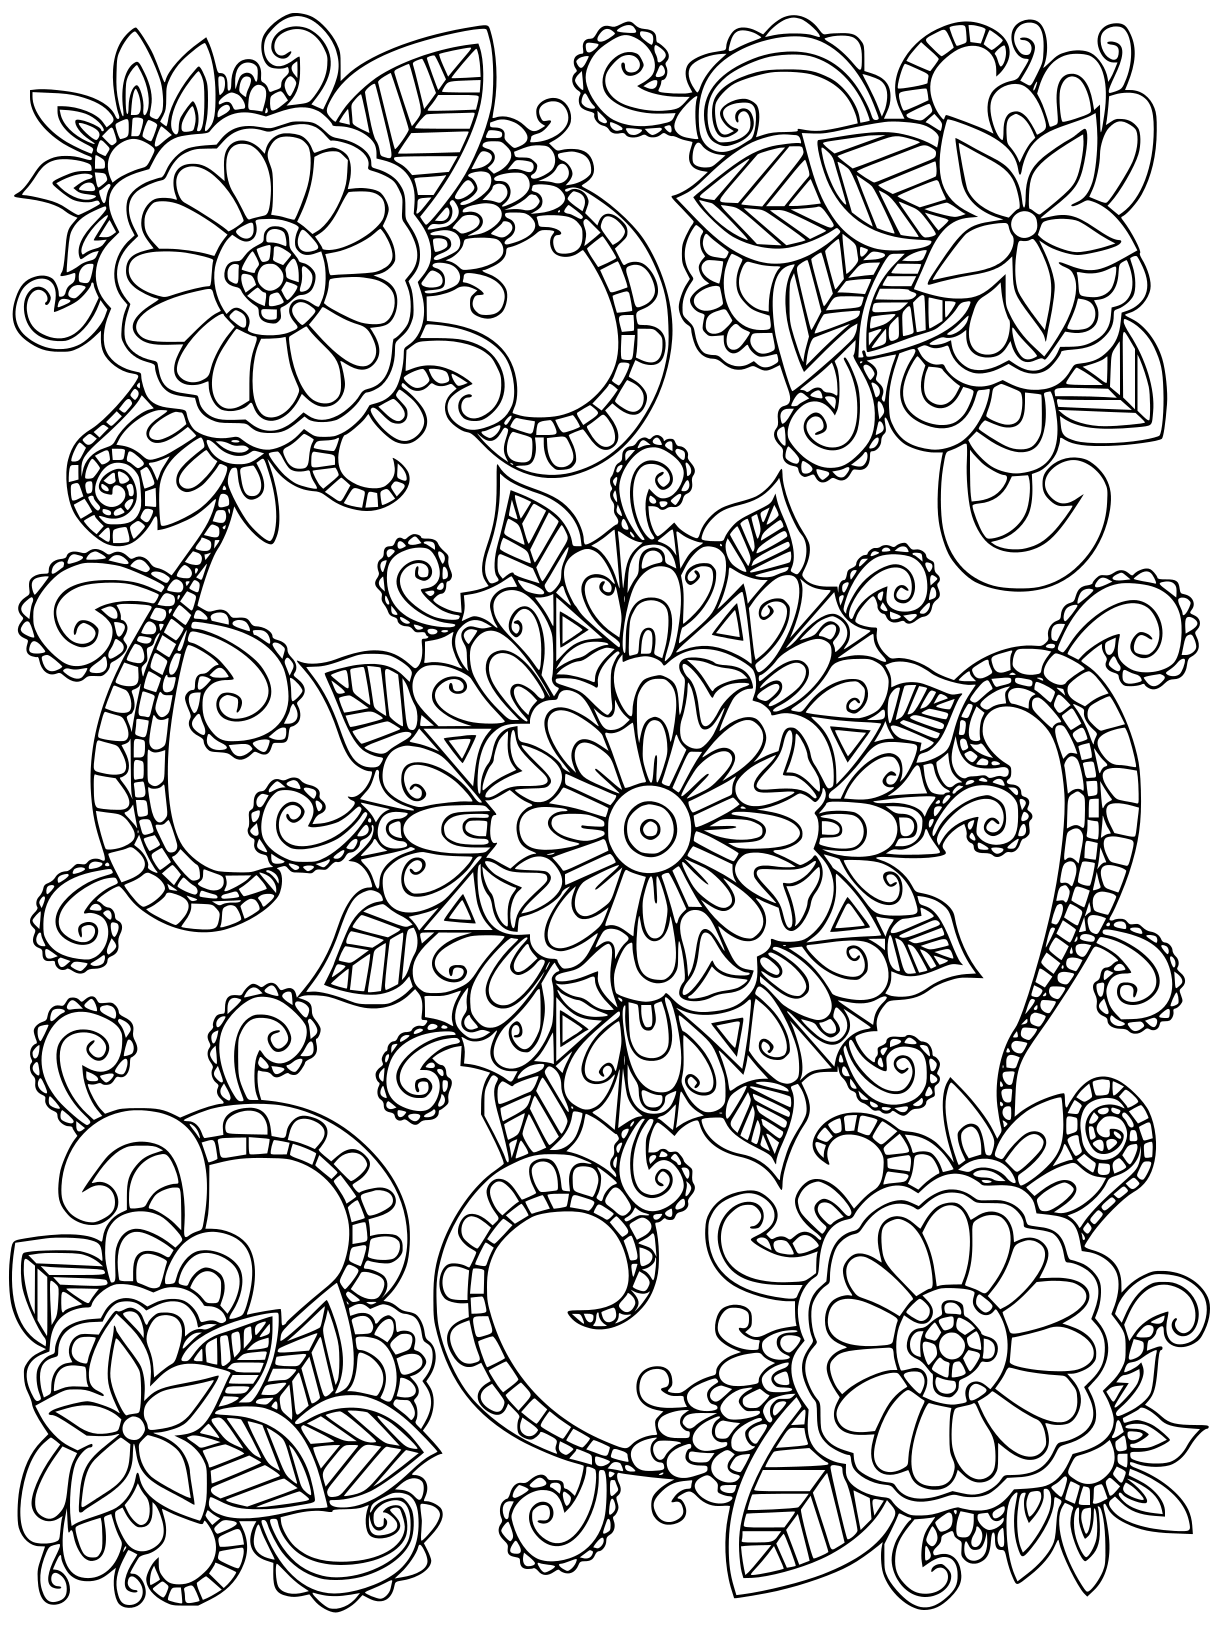 Mandala Flowers For Adults Coloring Page